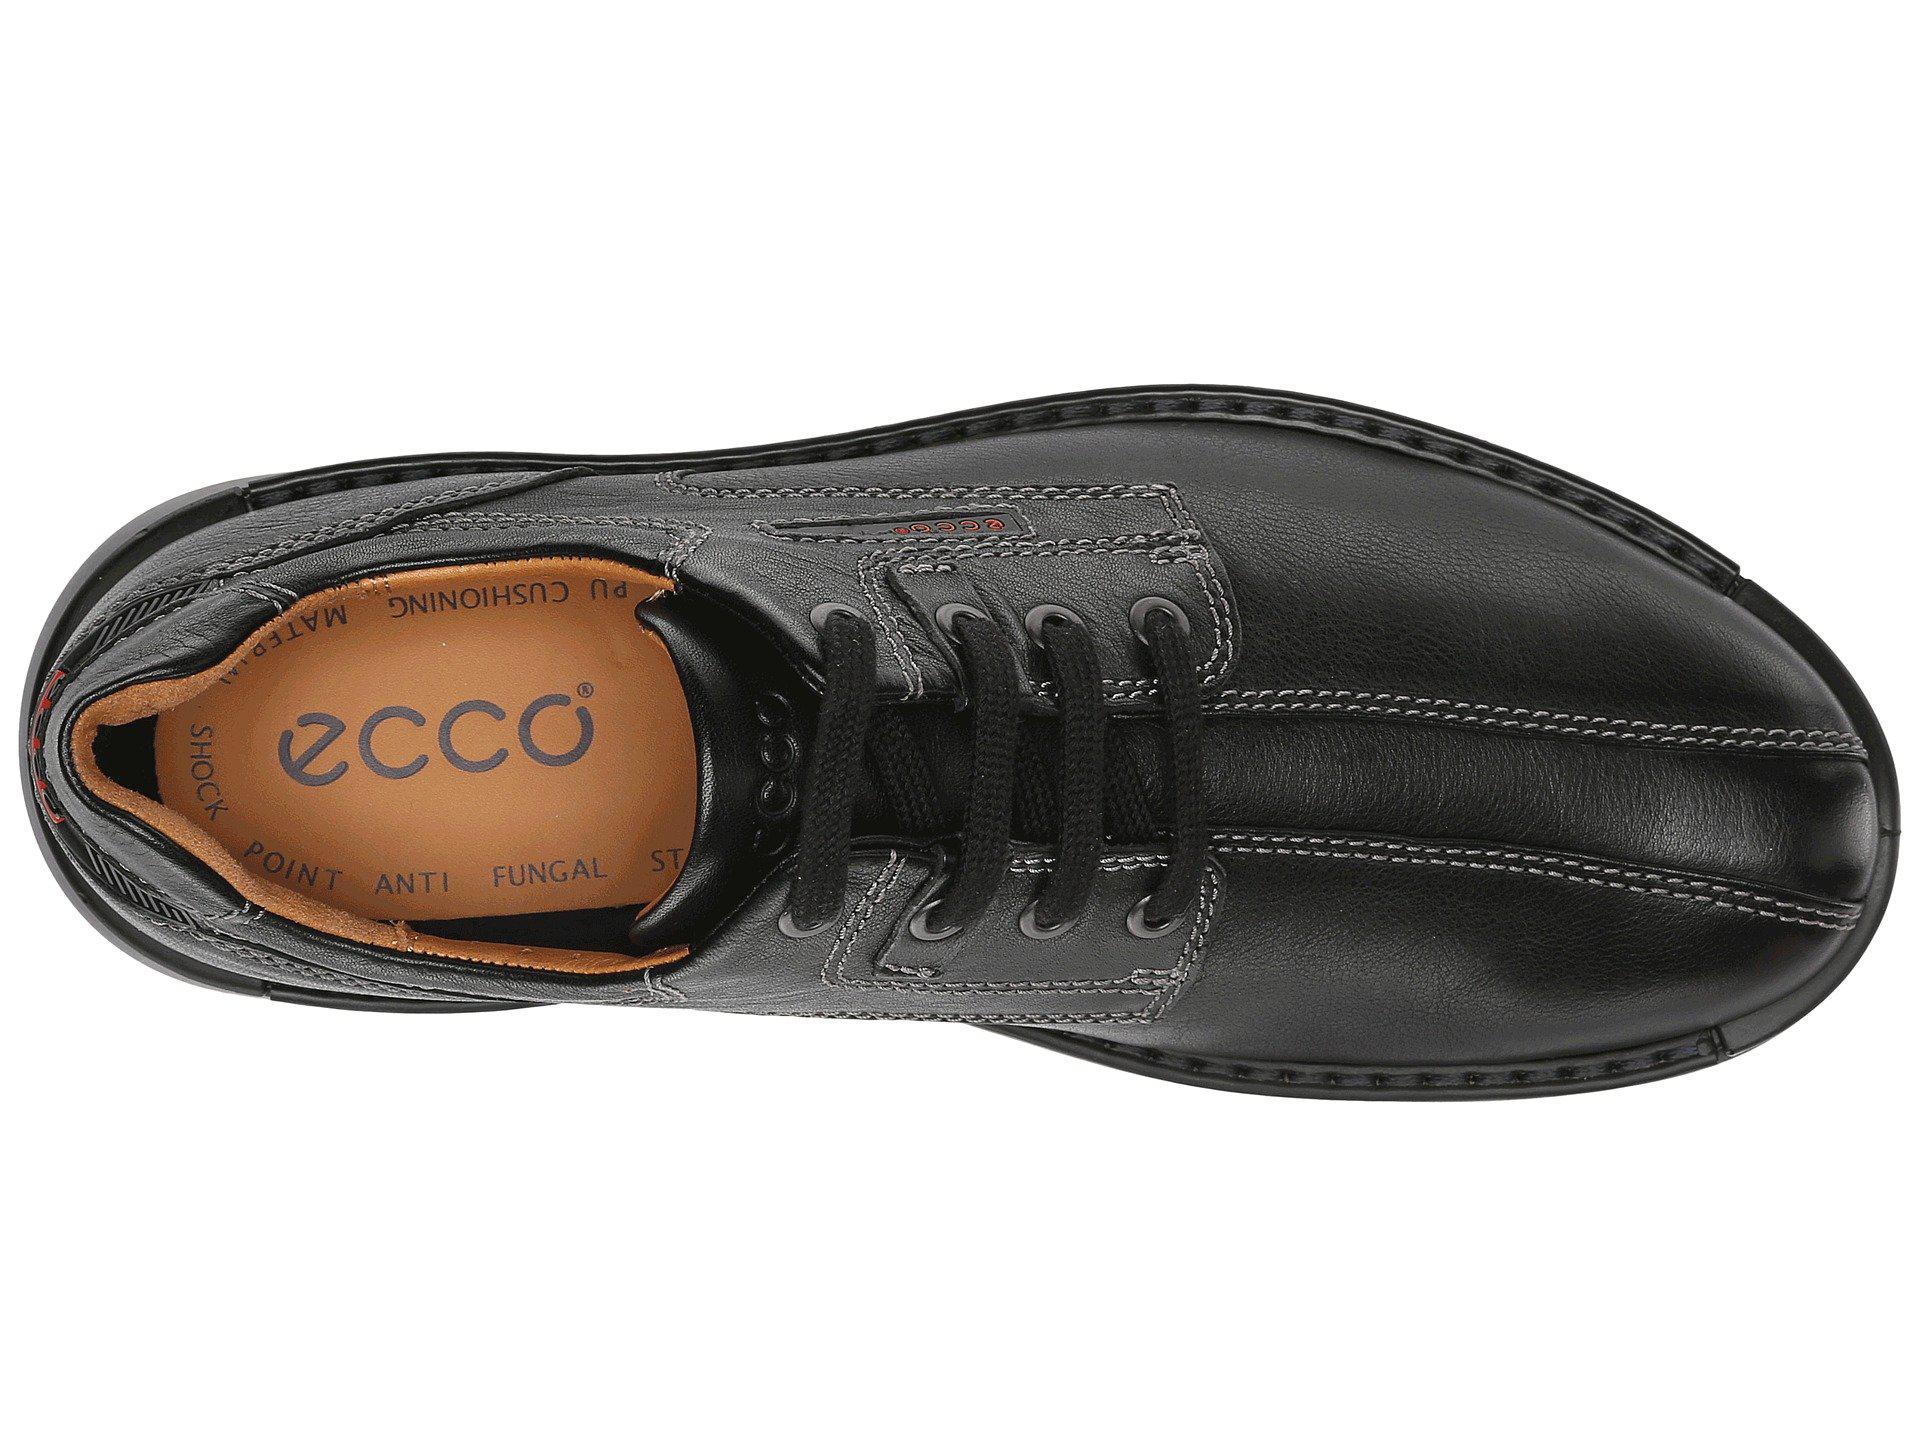 Ecco Fusion Bicycle Toe Tie Clearance - www.scavoneins.com 1692592458